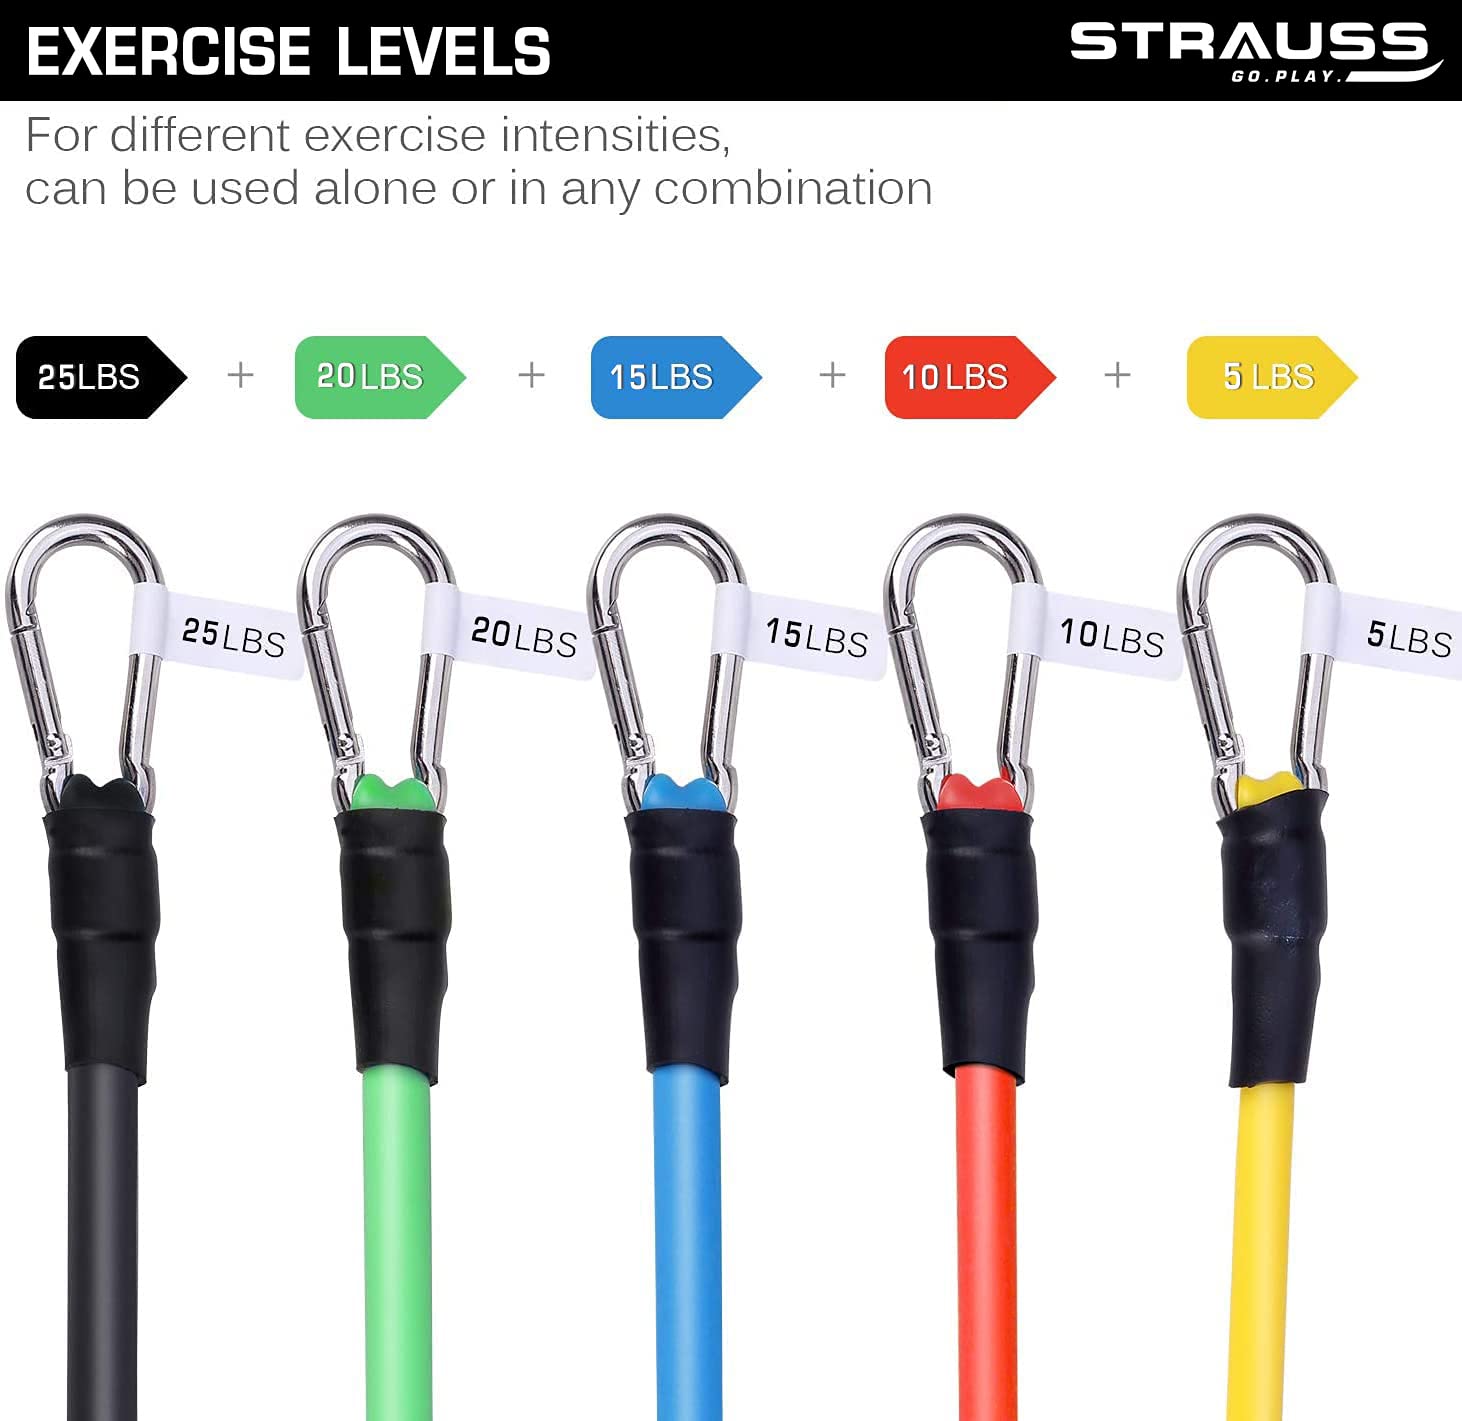 Strauss TPE Resistance Tubes with Door Anchor, Handles, Waterproof Carry Bag, Legs Ankle Straps | Ideal for Resistance Training & Physical Therapy | Exercise Bands for Gym & Home Workouts | Set of 5